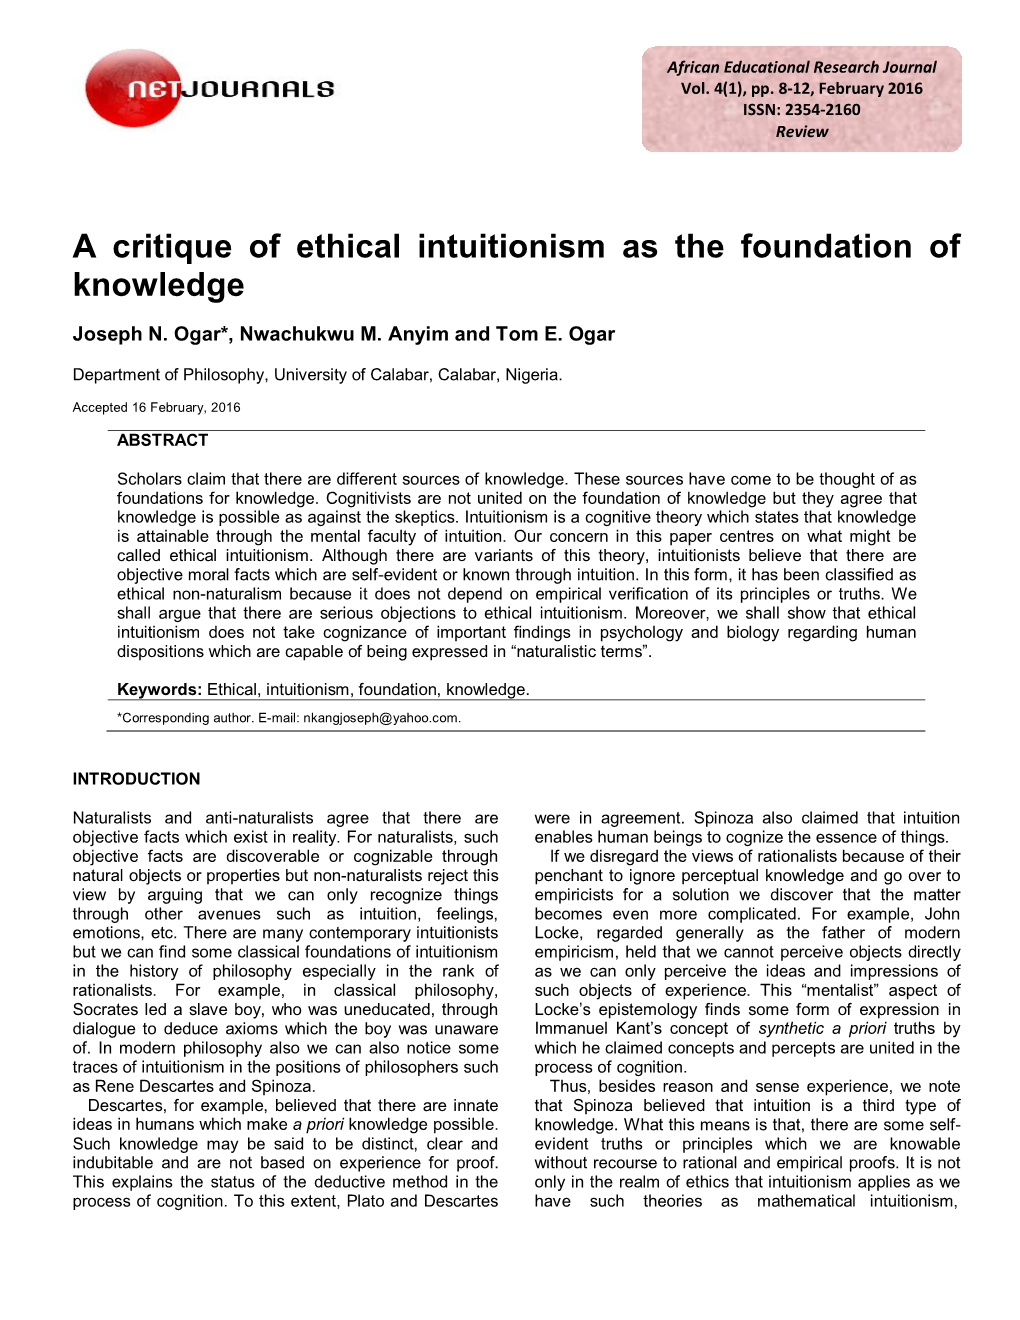 A Critique of Ethical Intuitionism As the Foundation of Knowledge